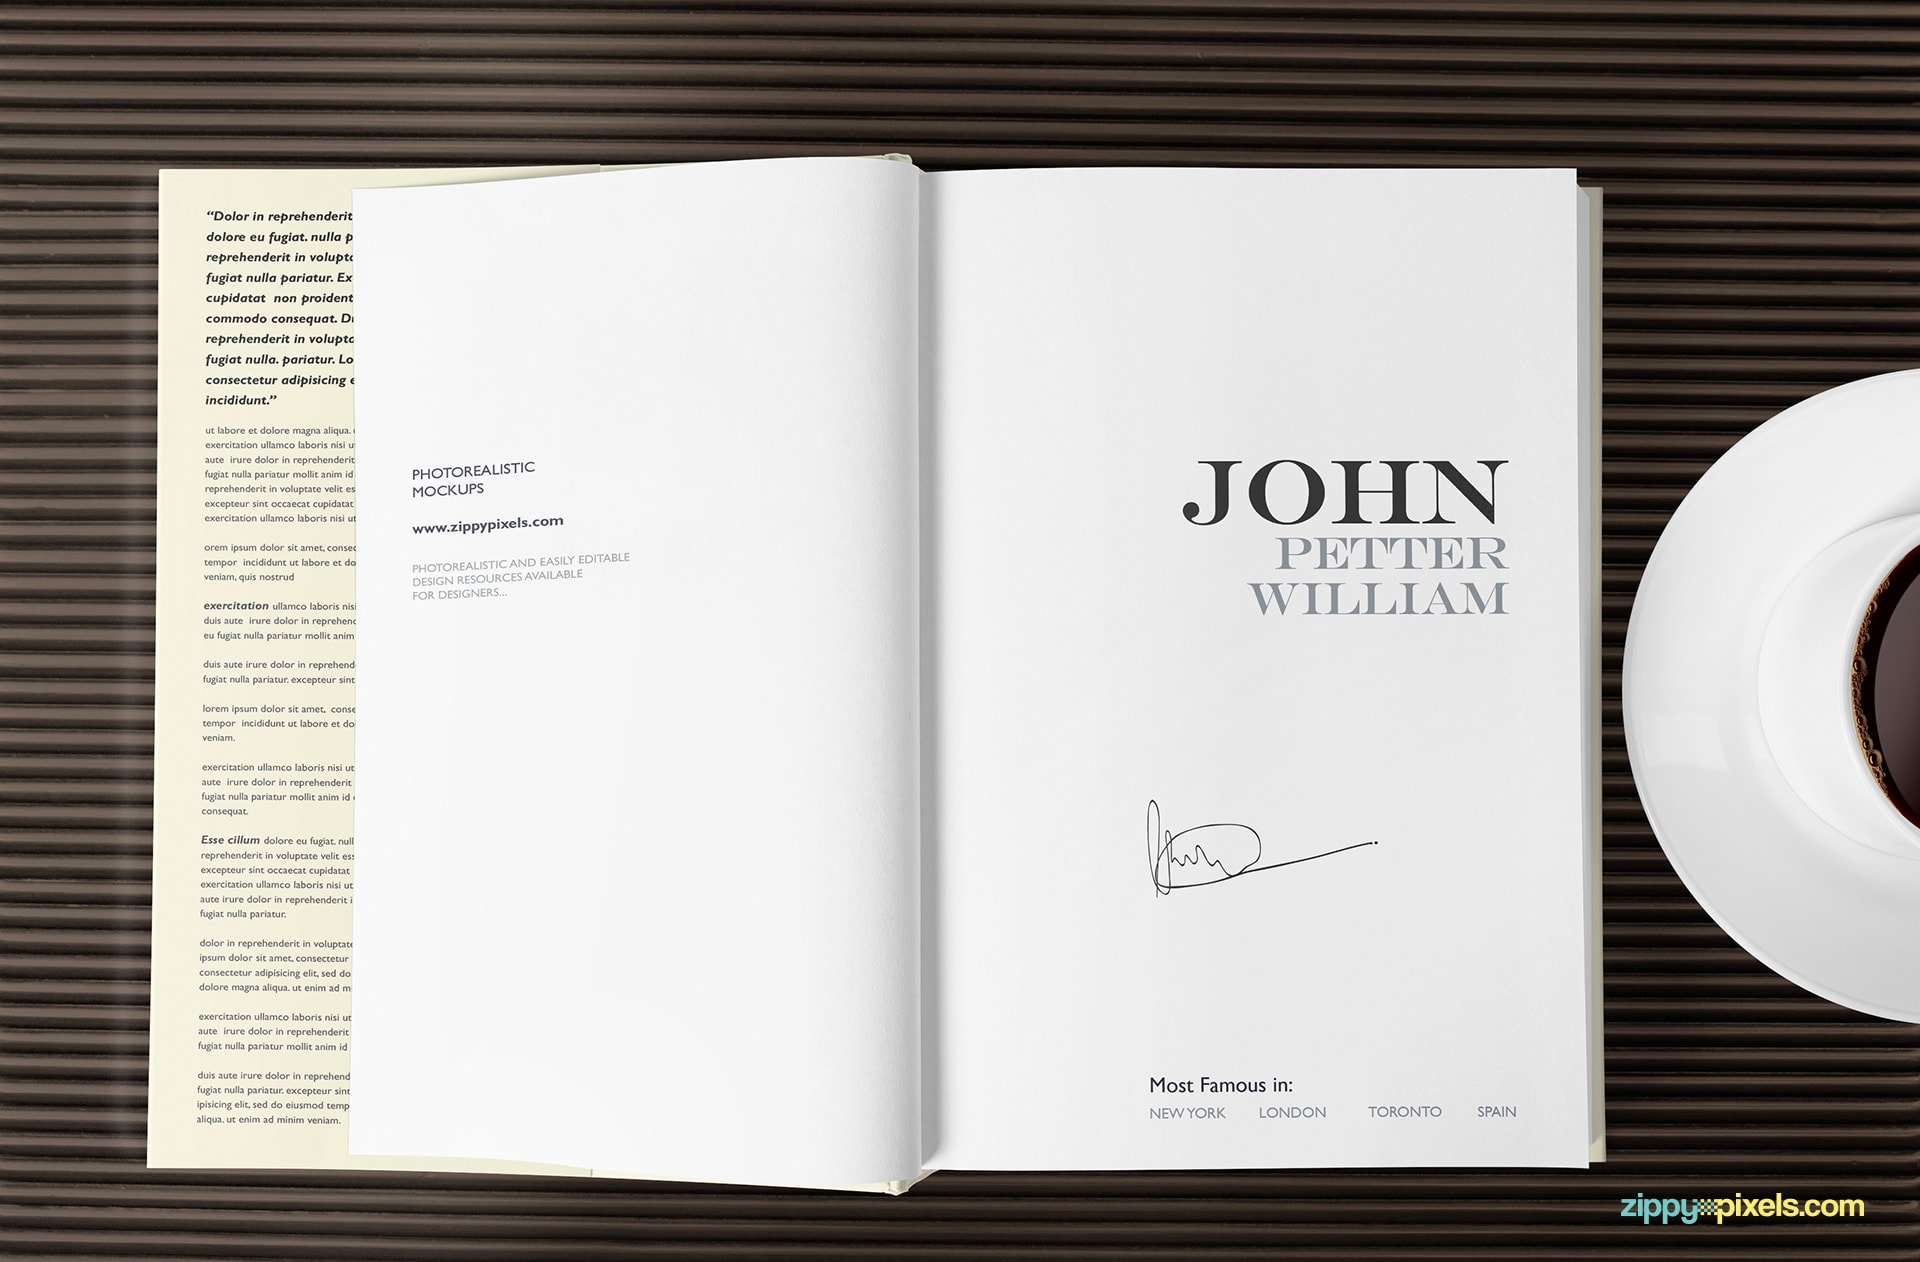 hard-cover-book-mockup-opened-inner-title